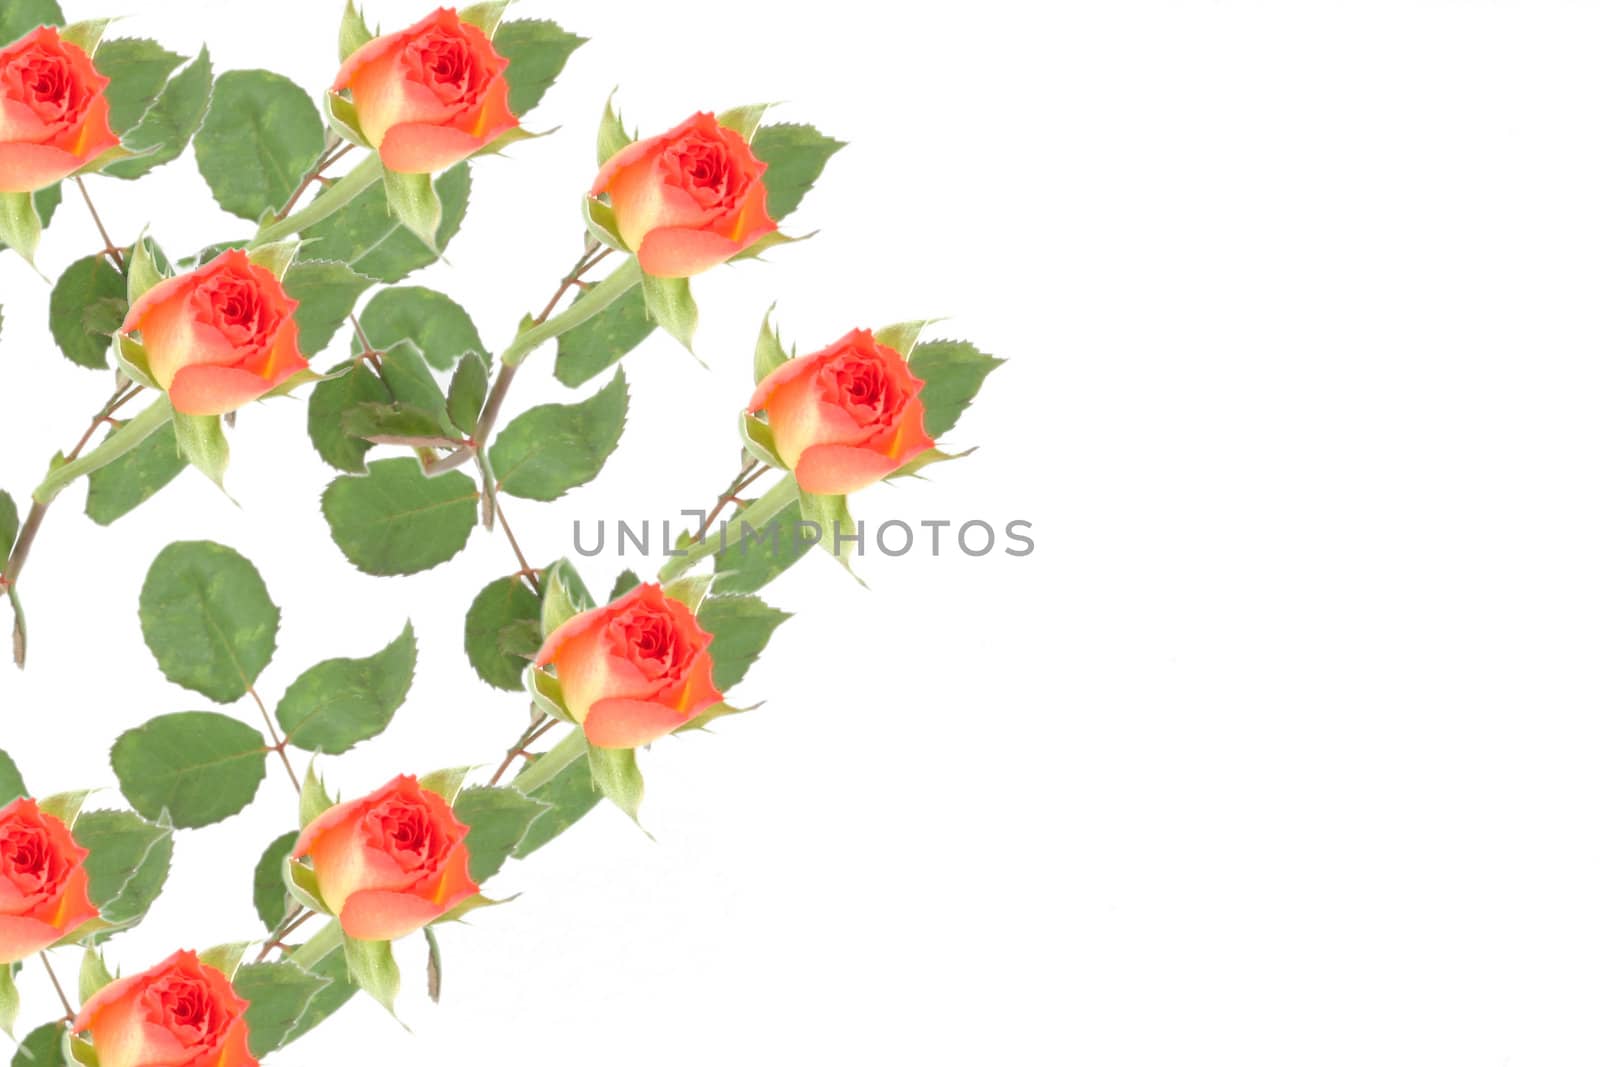 illustration of a heart of roses set to the side of the image